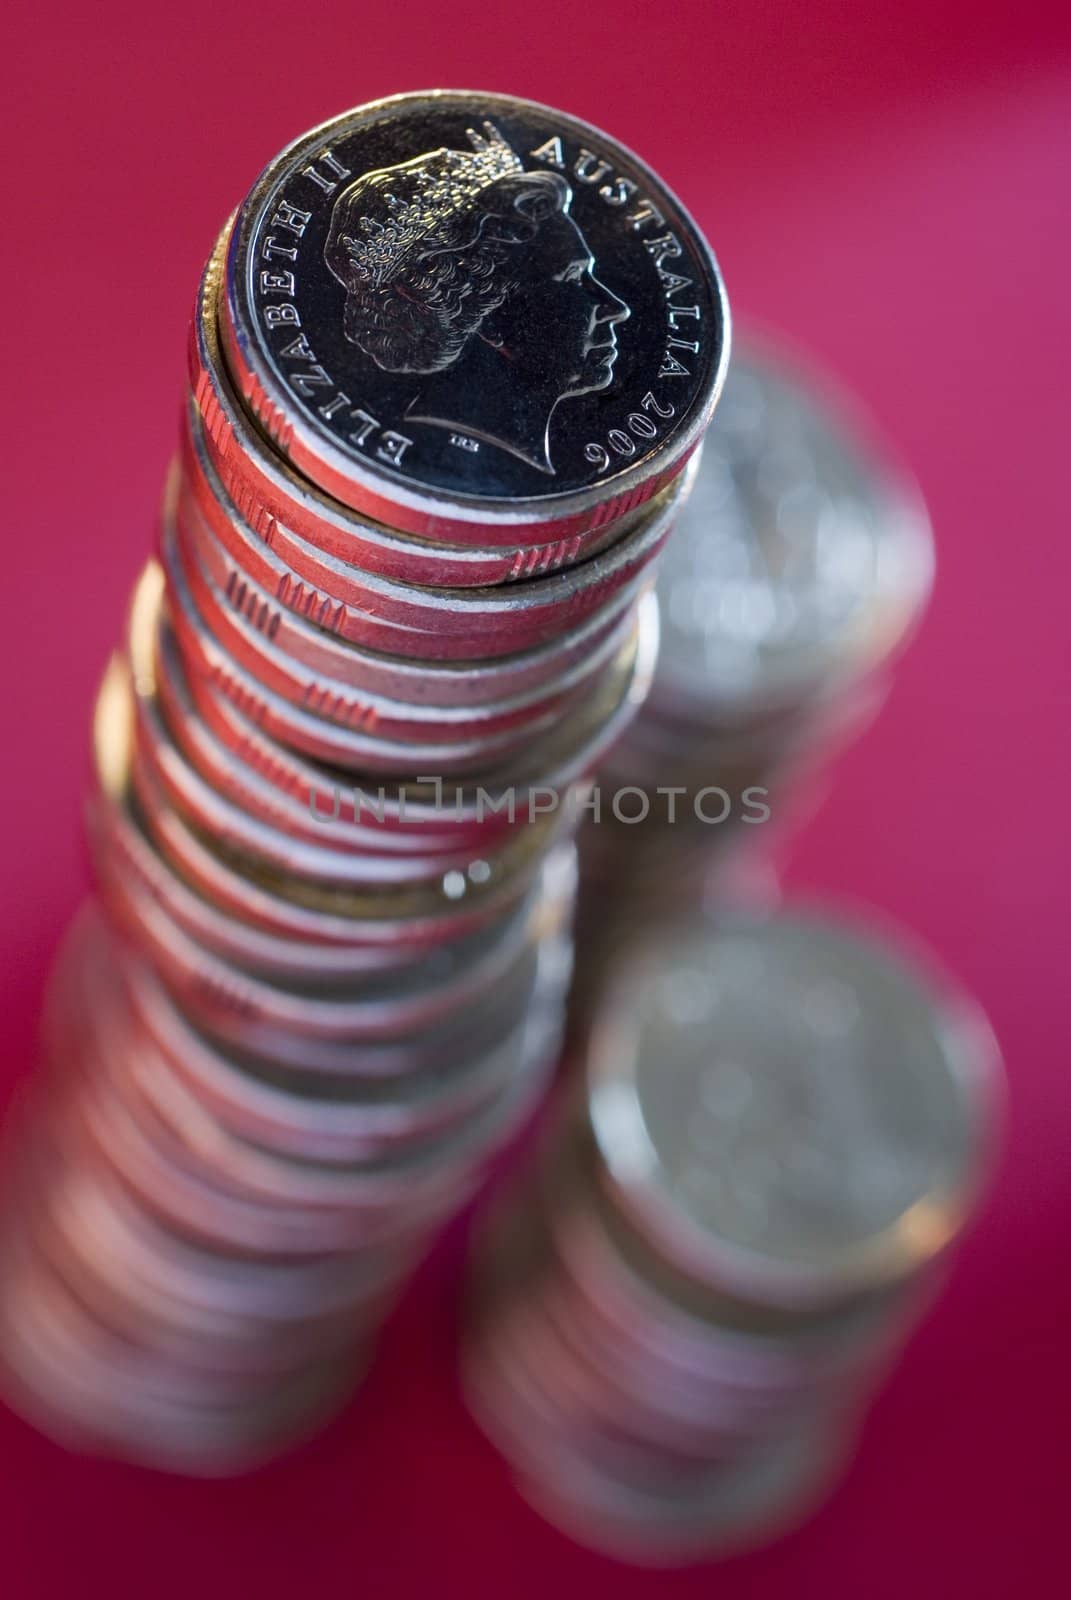 a large stack of australian dollar coins on a red background